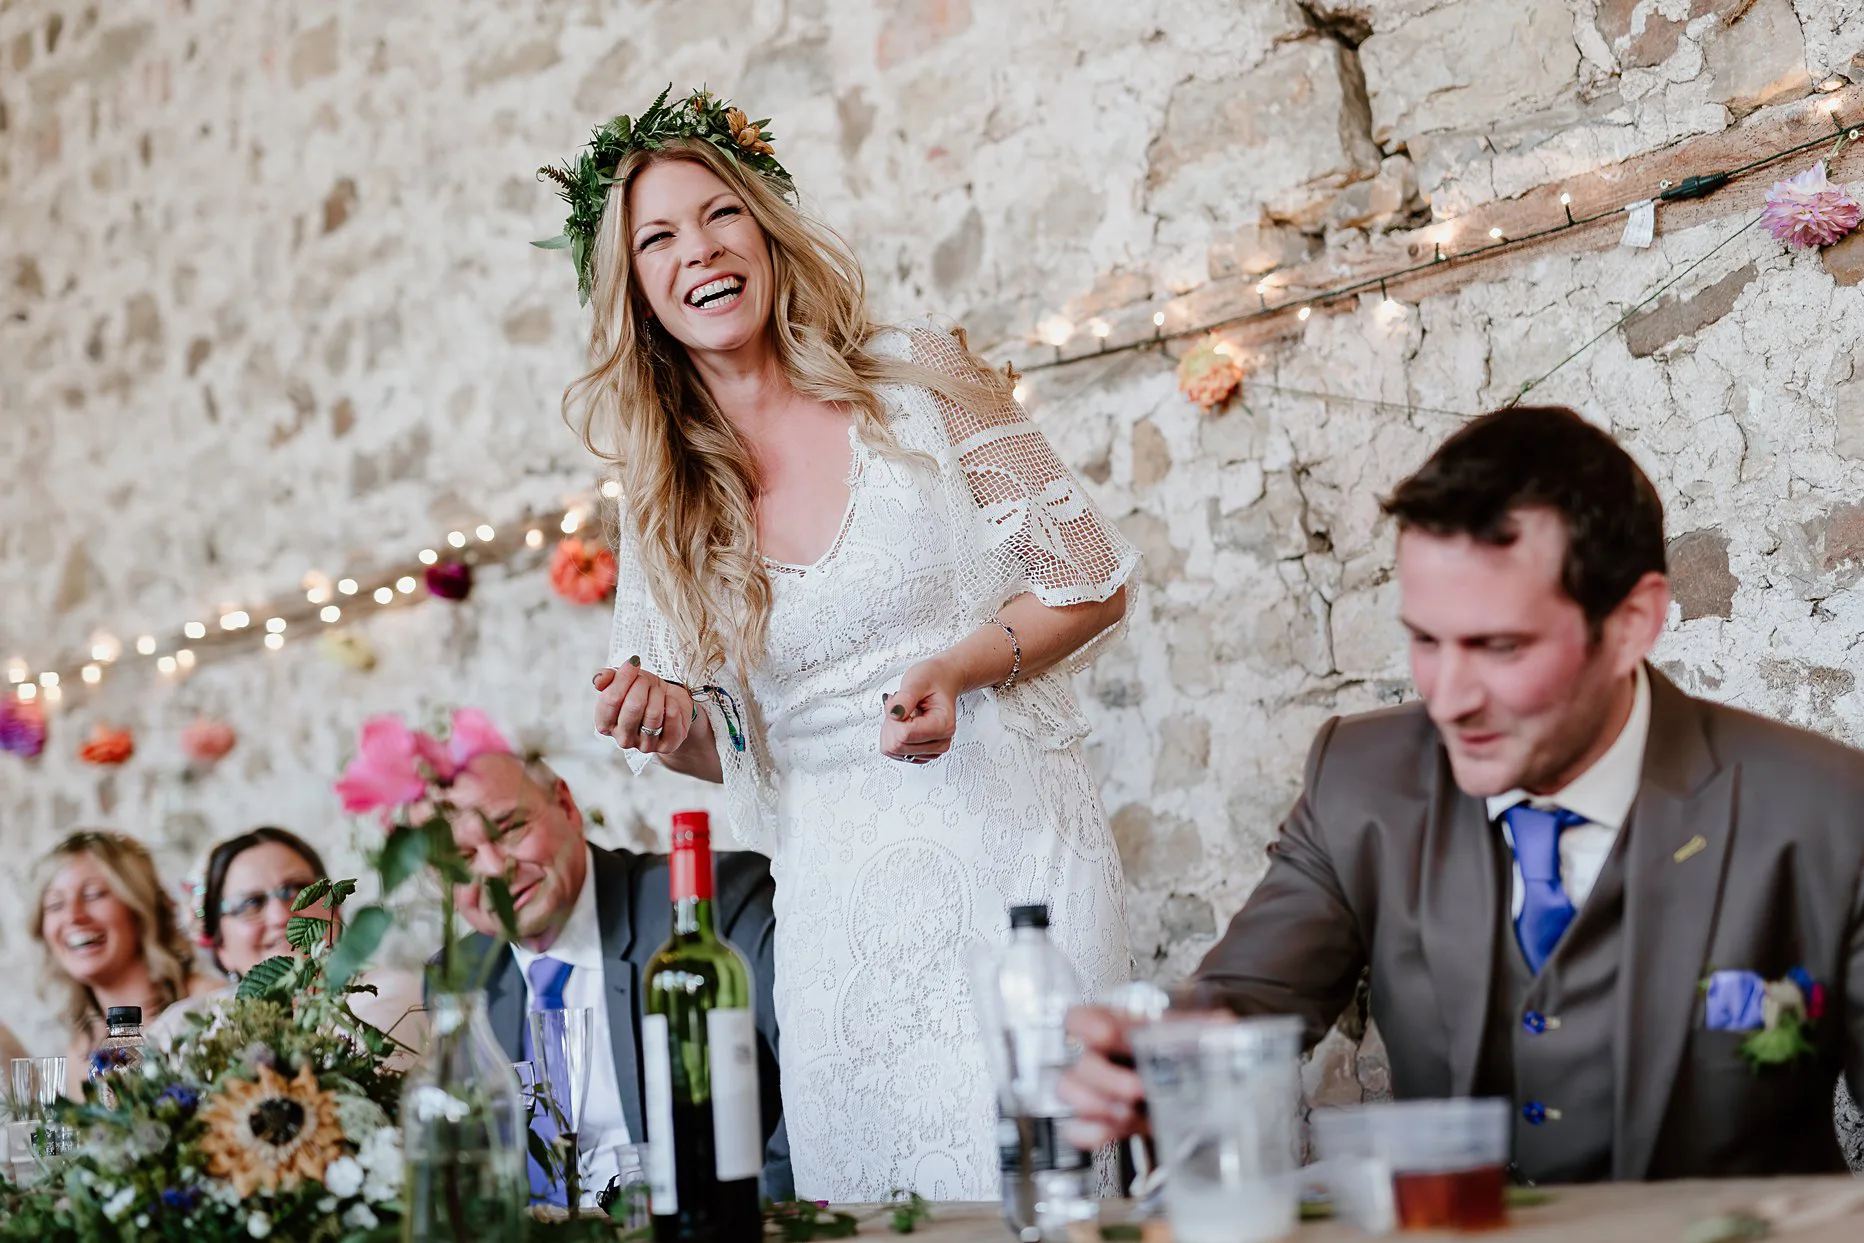 Bride giving her wedding speech at Camp Katur. Bride is smiling and laughing. She is wearing a white crochet wedding dress and flower crown.